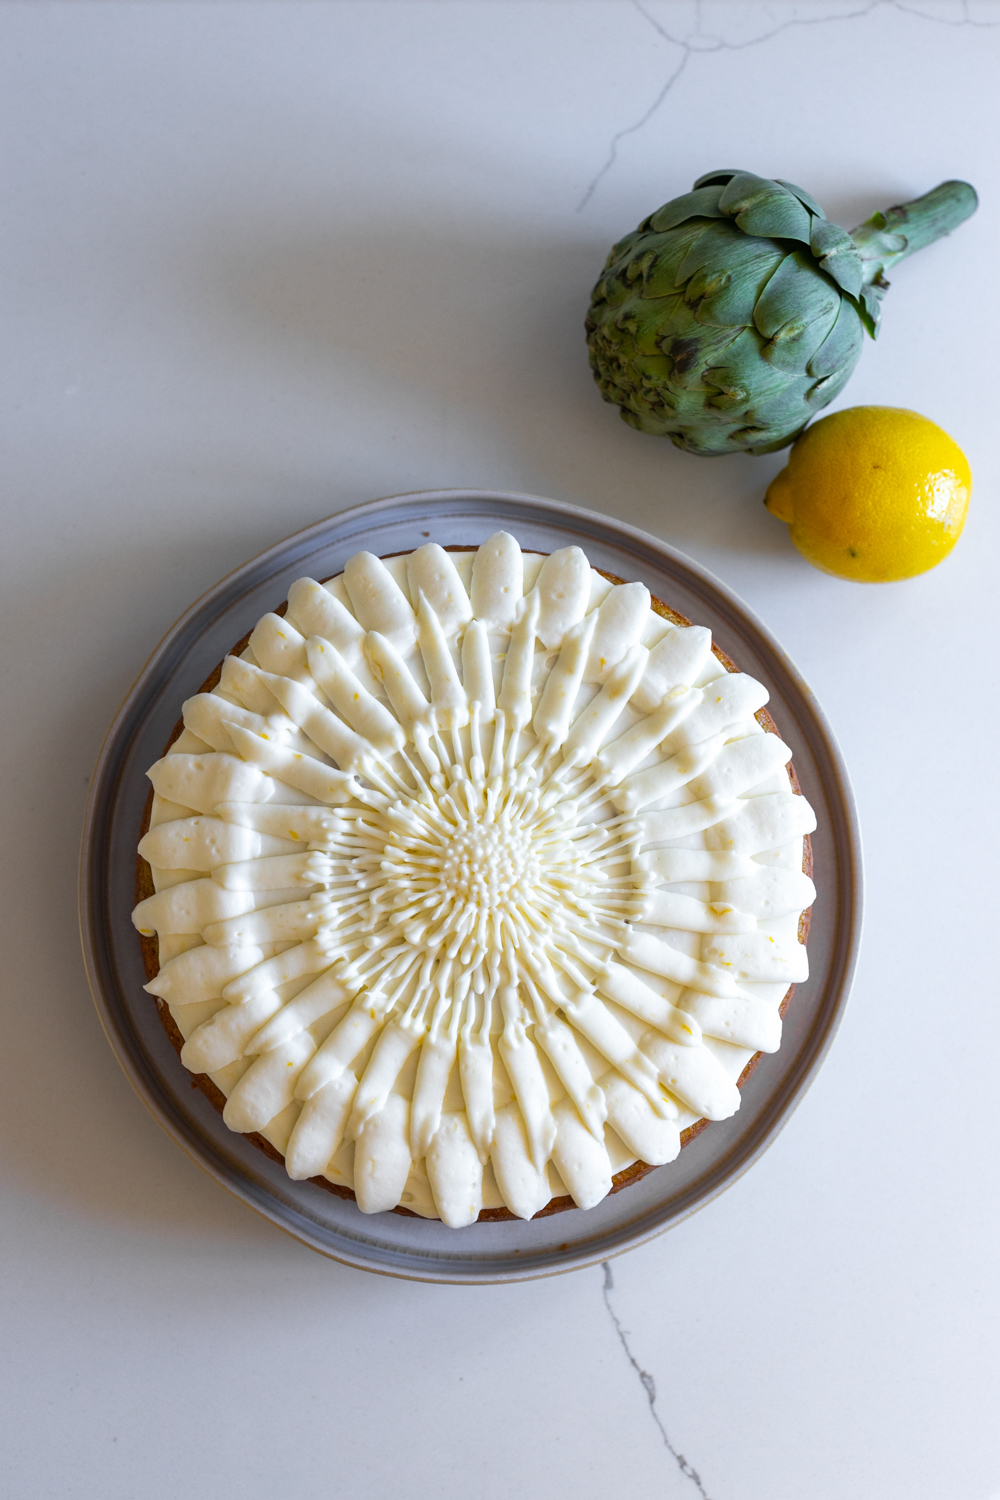 Artichoke Olive Oil Cake with Lemon Cream Cheese Frosting